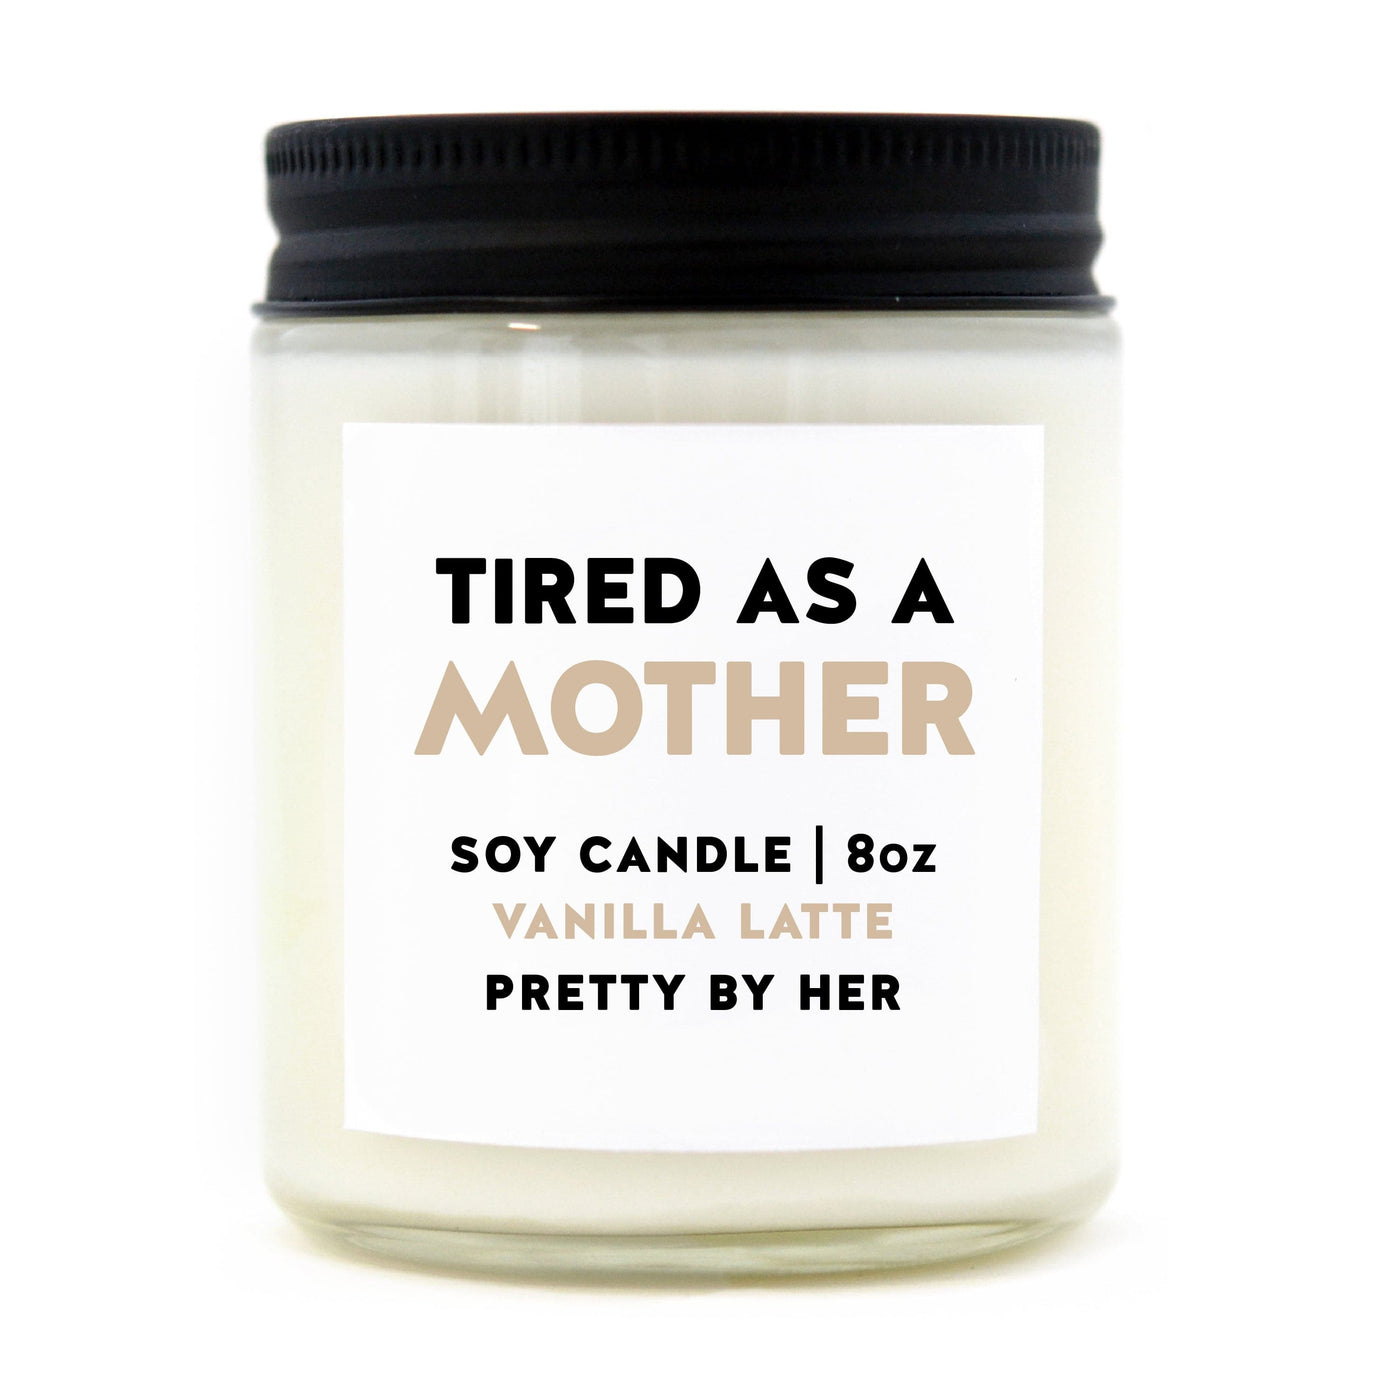 Tired as a Mother | Candle - The Local Space